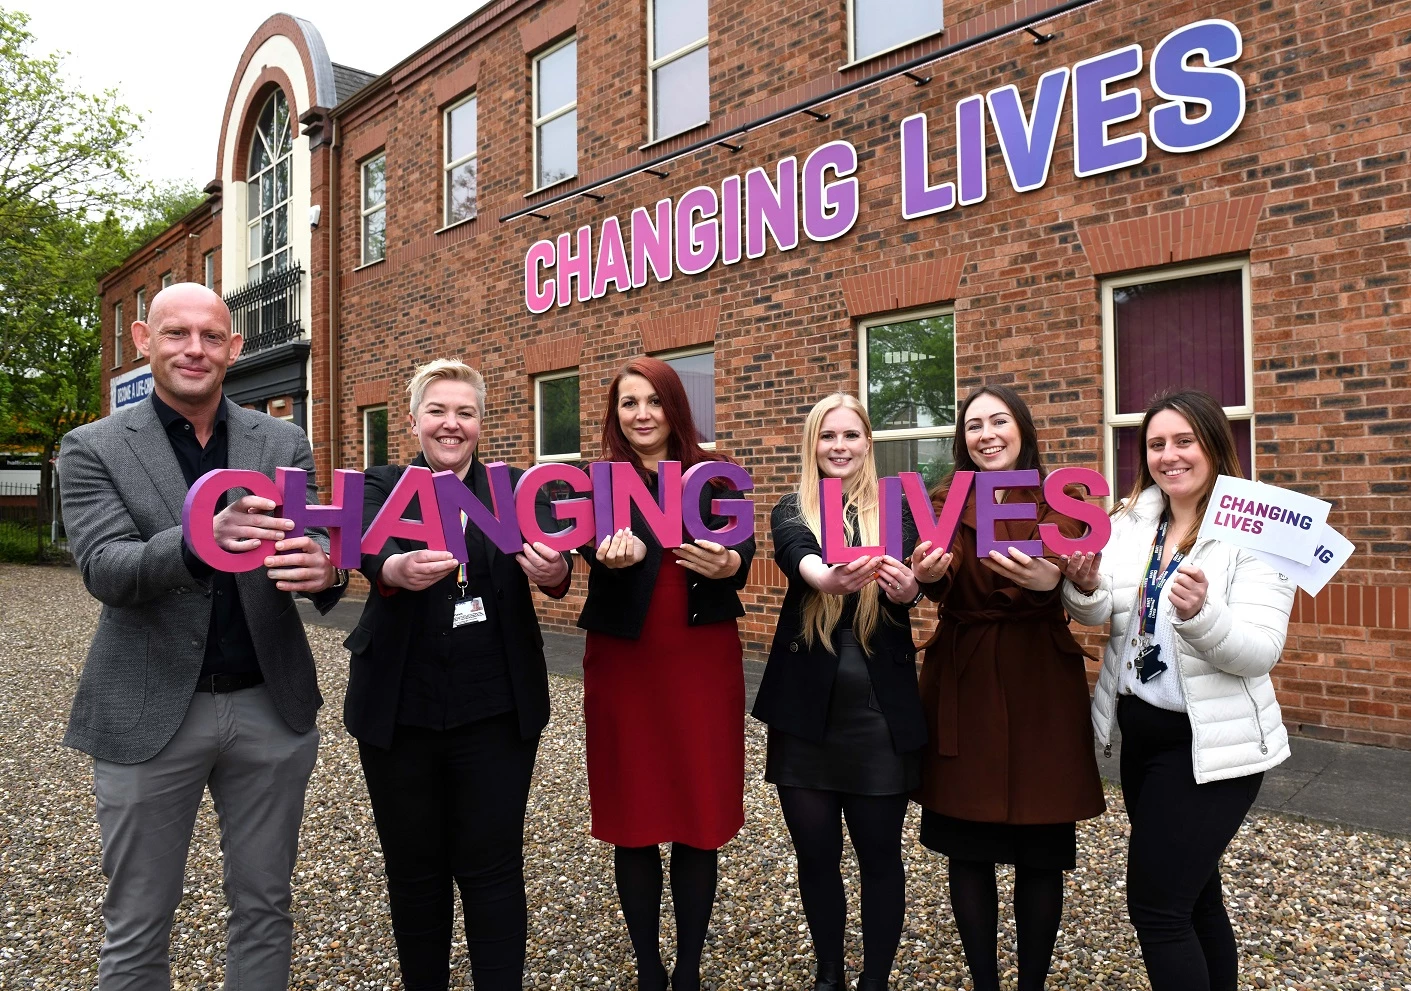 Left to right: Central Employment’s Will Palmer, Changing Lives’ Angela Purvis, Central Employment’s Collette Bolton, Carys Ball and Rachael Gorse with Alice Fisher from Changing Lives